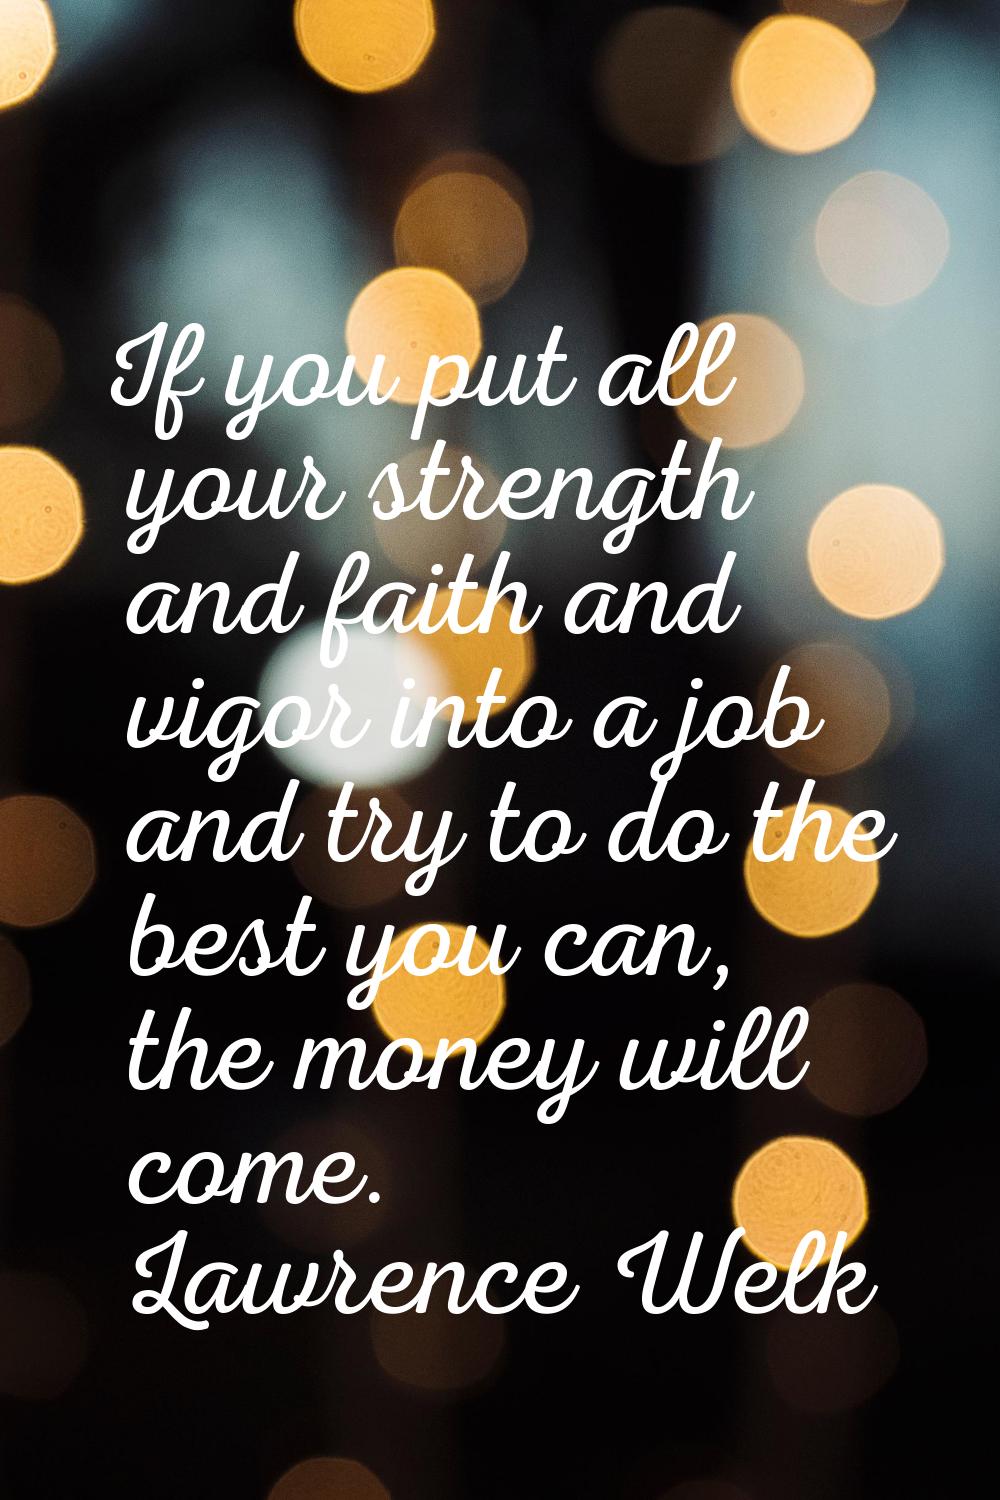 If you put all your strength and faith and vigor into a job and try to do the best you can, the mon